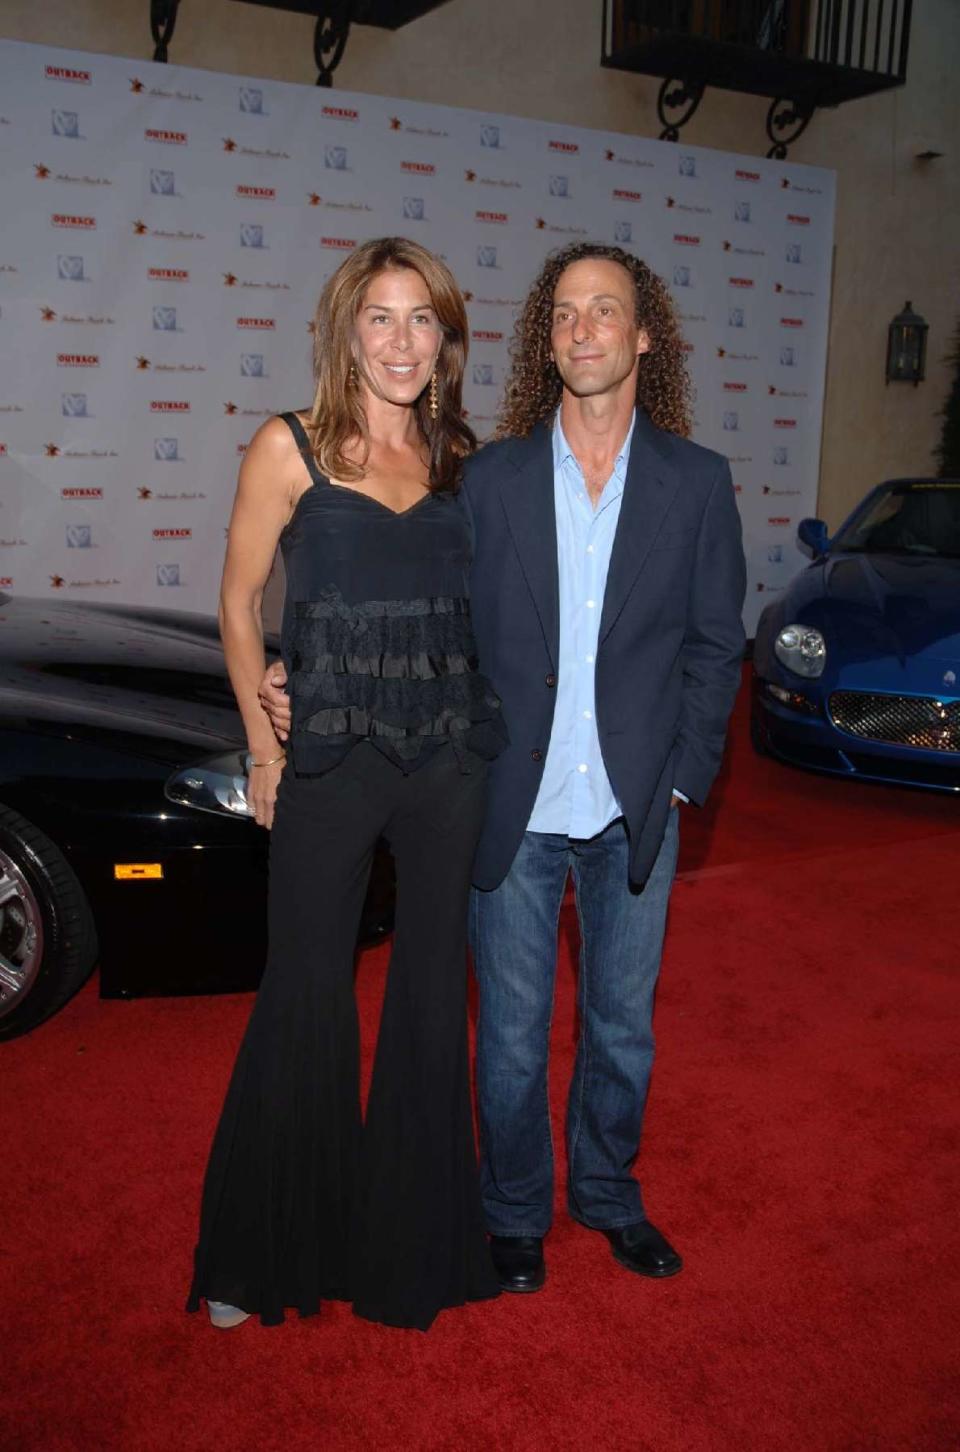 Kenny G Ordered To Pay Over $300,000 In Ex-Wife's Attorney's Fees